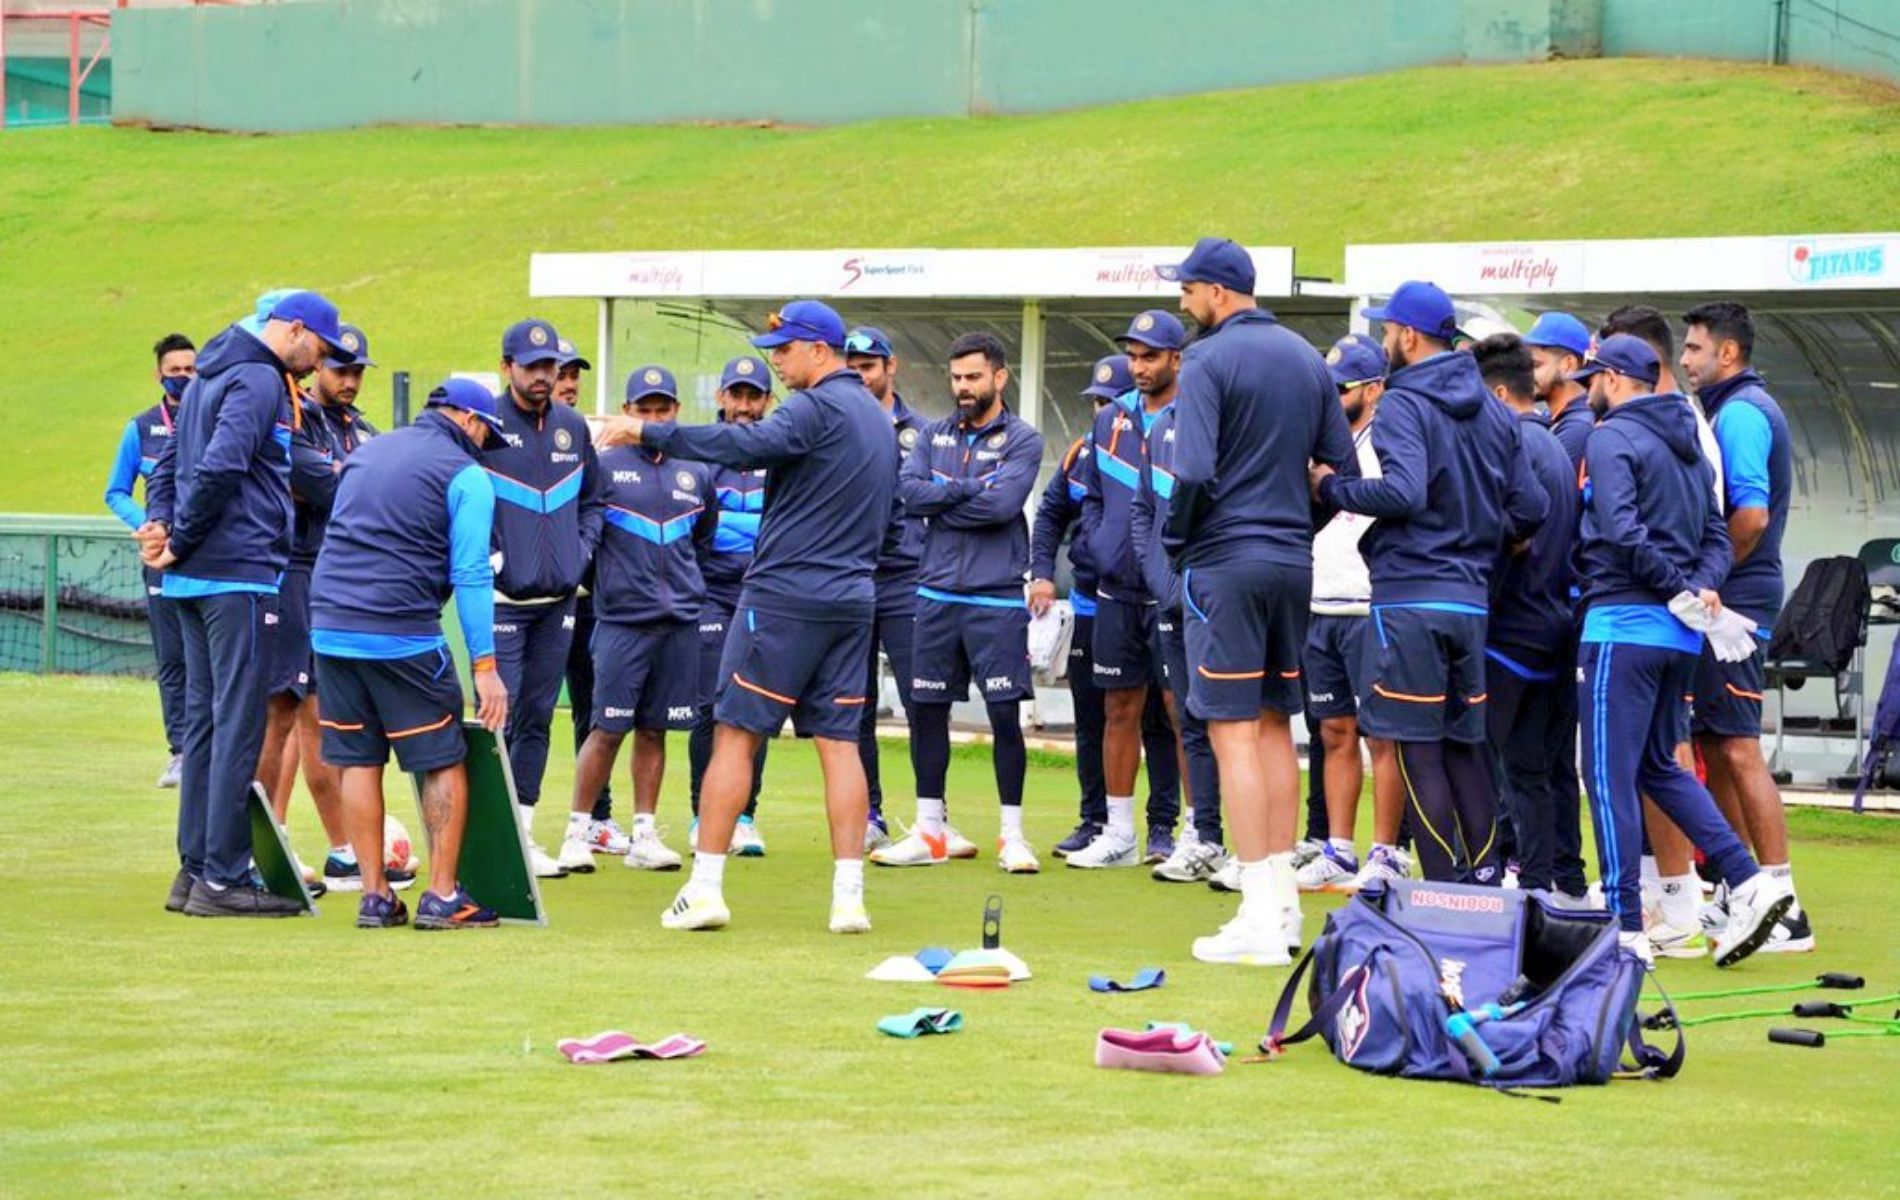 Rahul Dravid was seen addressing the Indian team during their second training session in South Africa.